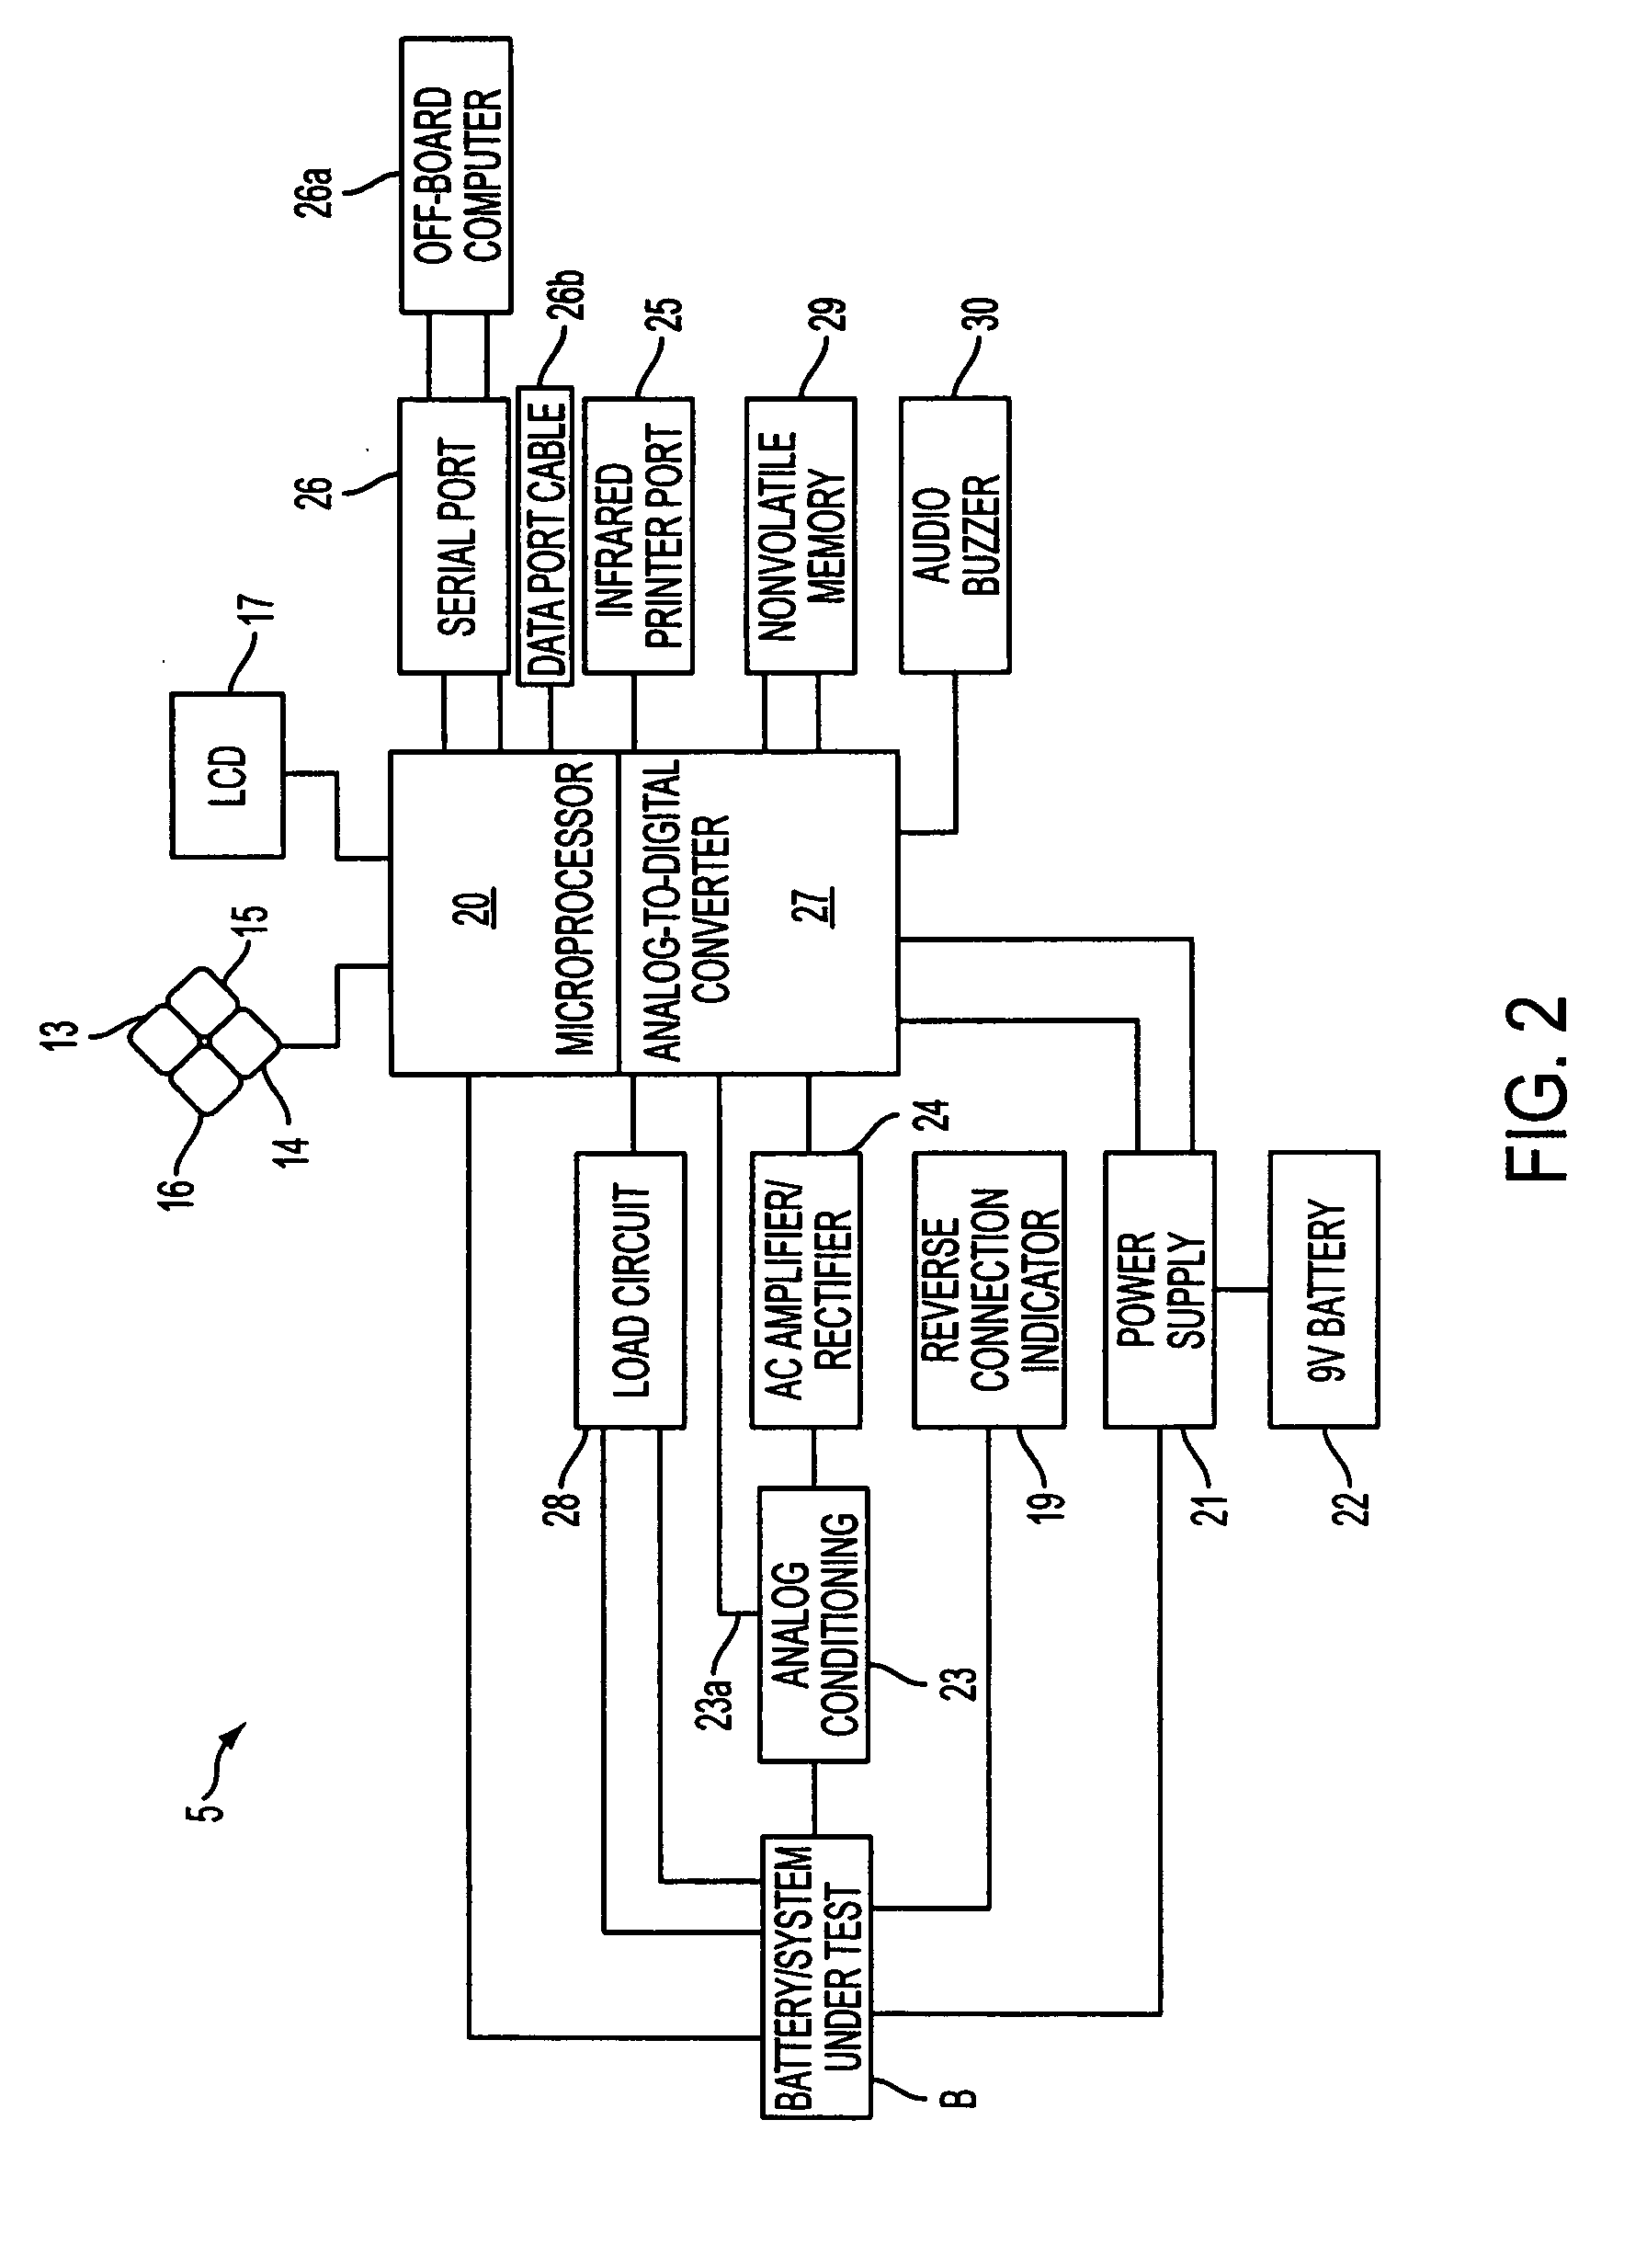 Heavy duty charging and starting system testor and method